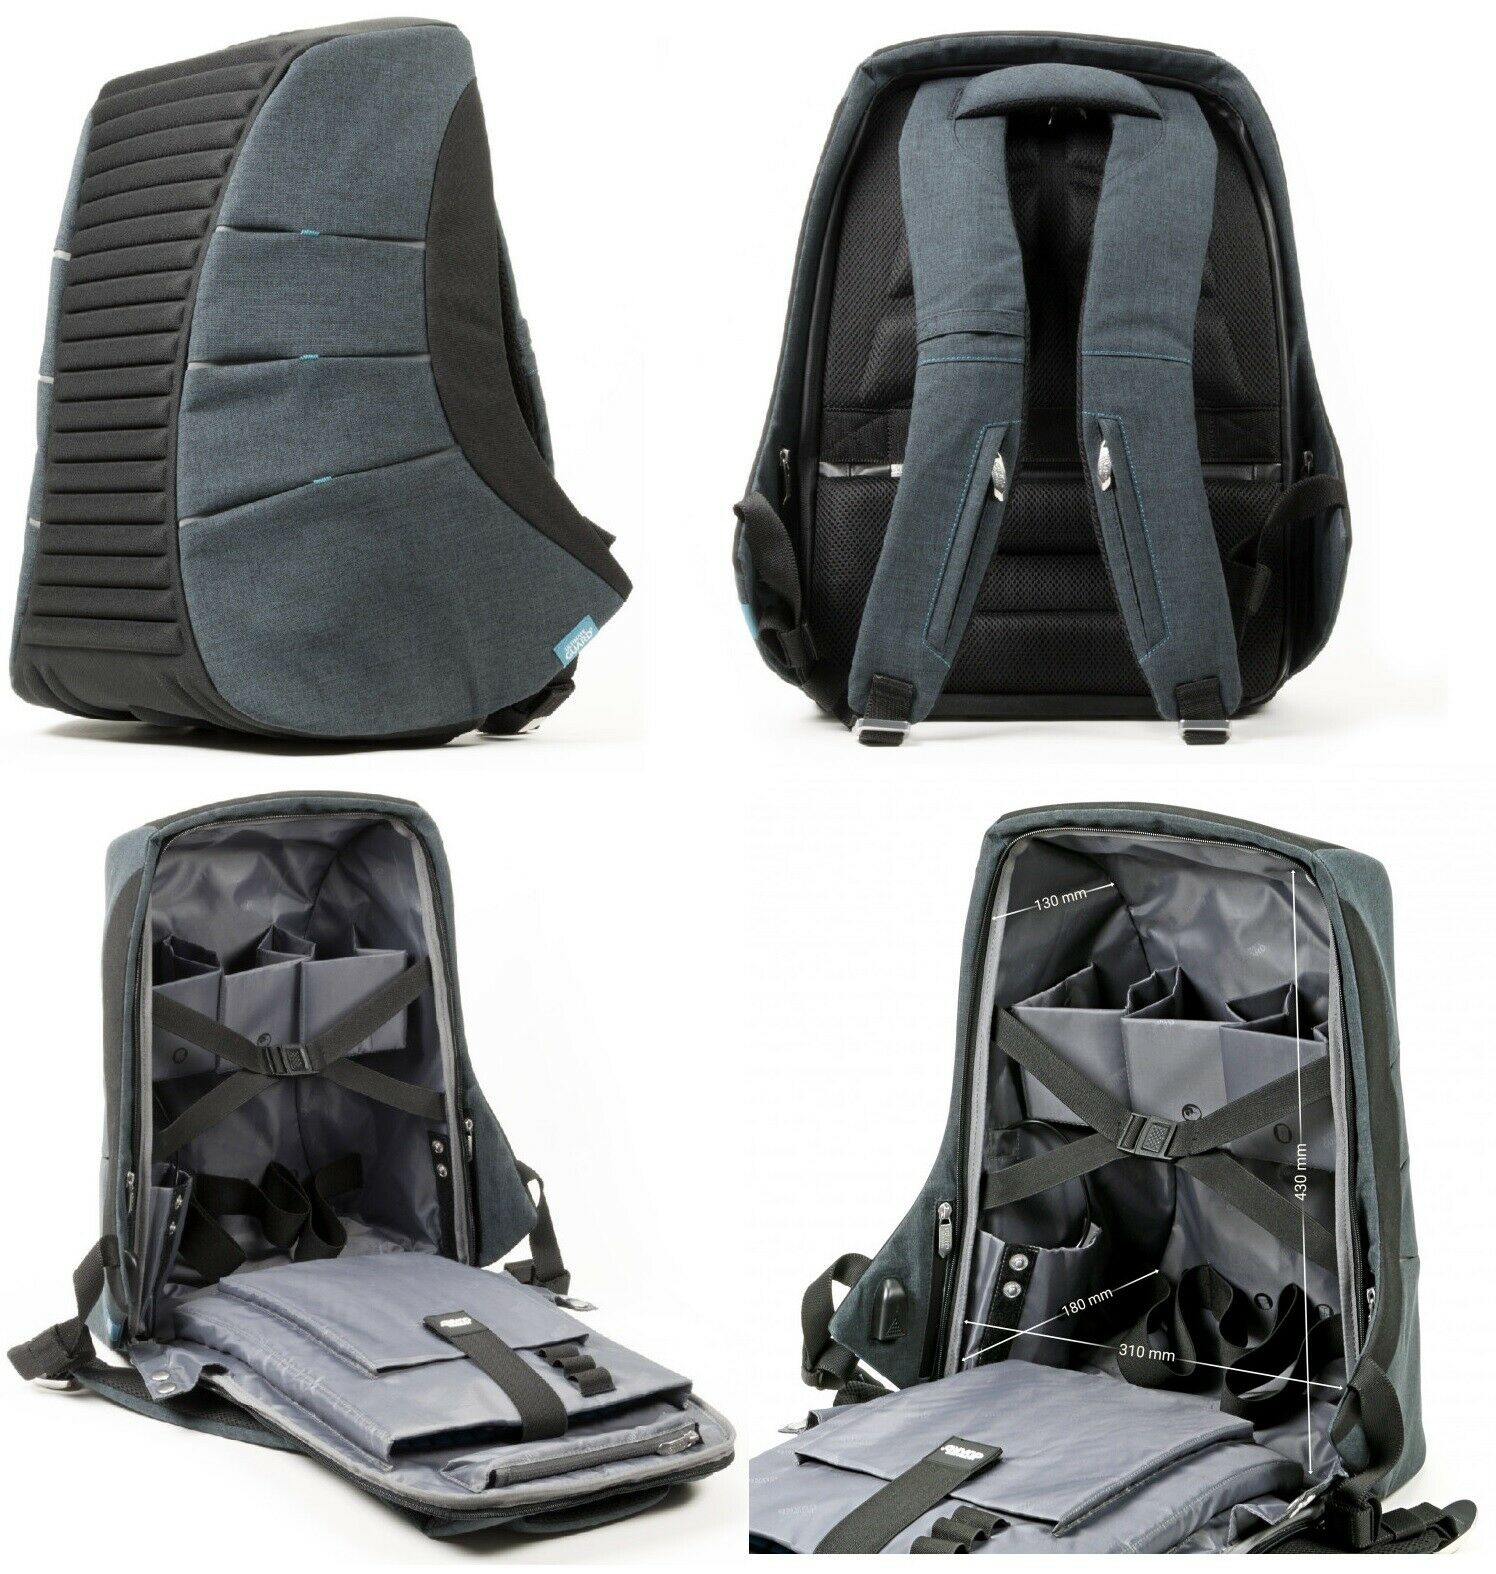 Ultimate Guard Ammonite Anti-Theft Backpack (Dark Gray)-Ultimate Guard-Ace Cards & Collectibles